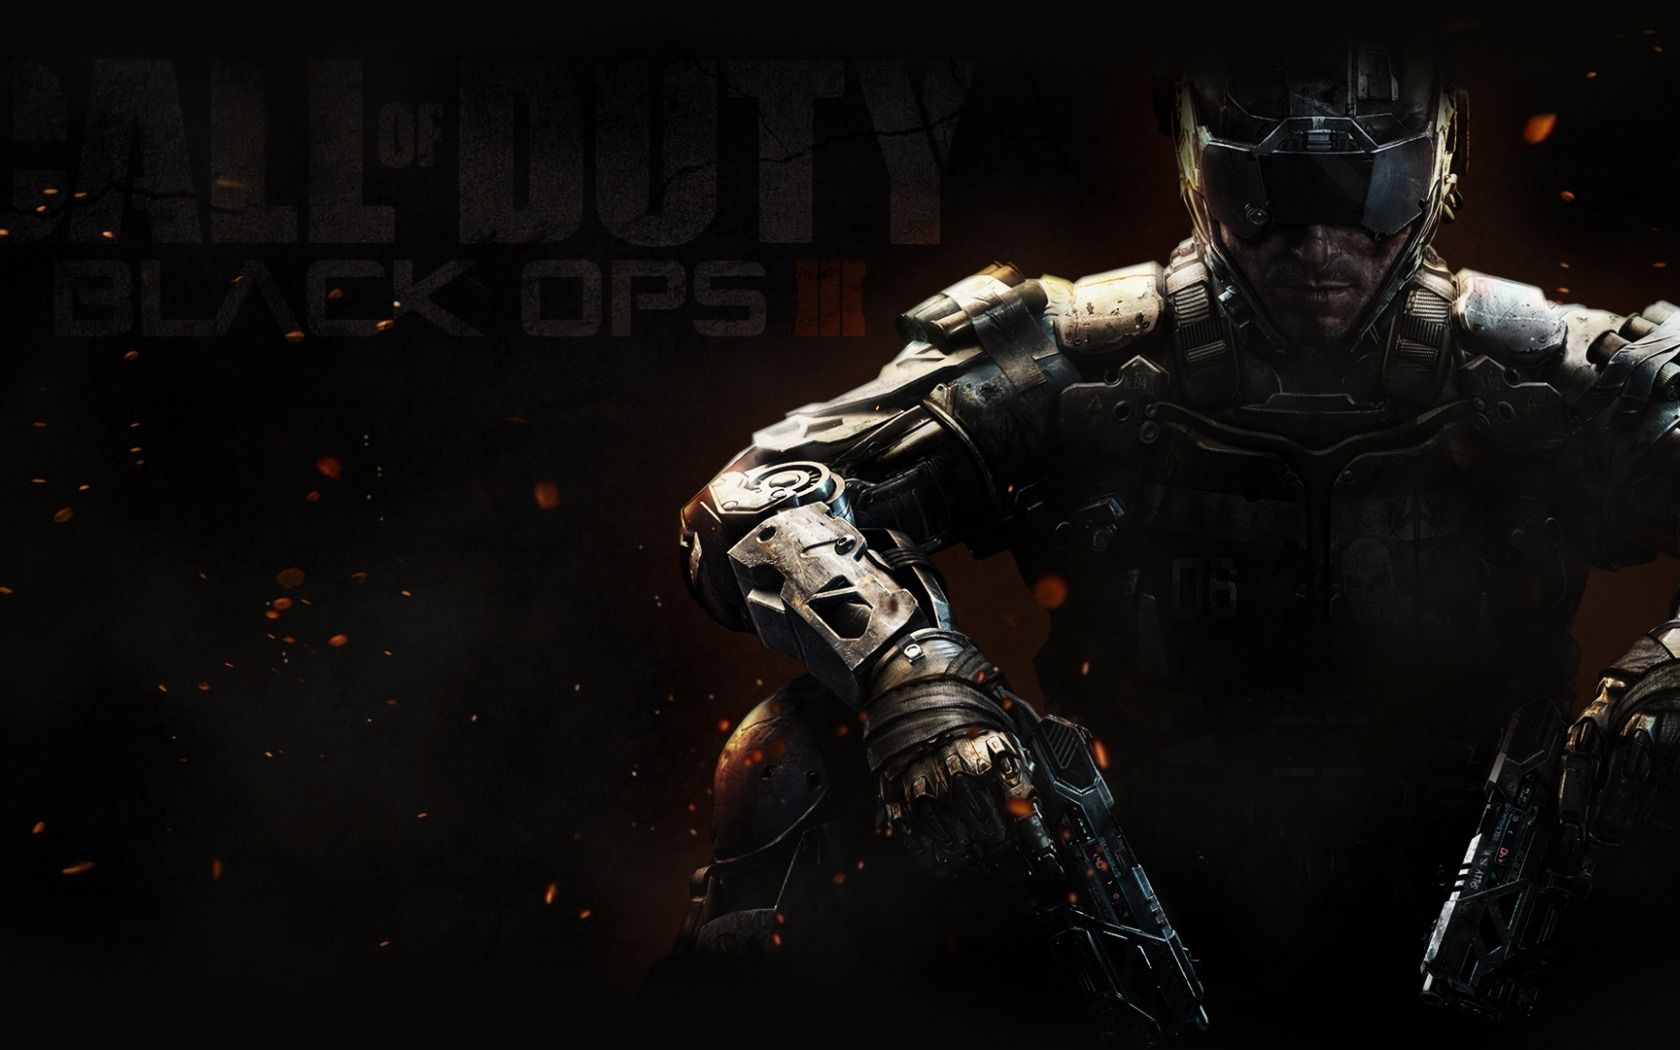 Download Wallpaper 1680x1050 Call of duty black ops 3, Call of